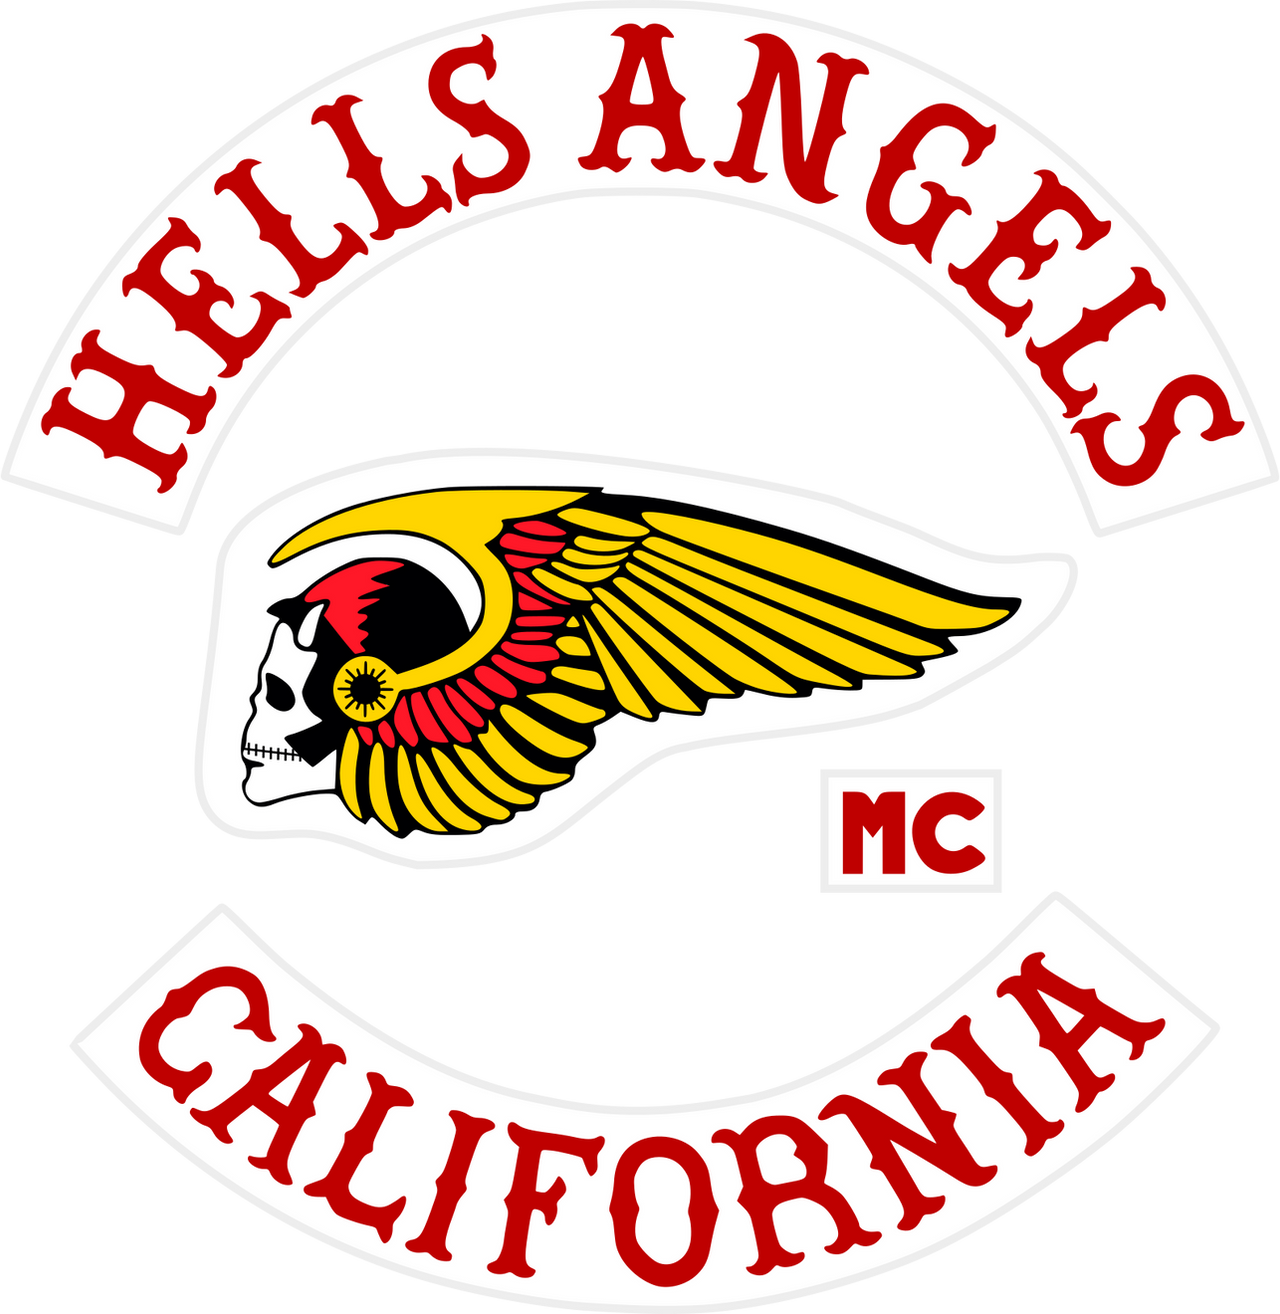 Hells Angels Motorcycle Club Patches by FinerSkydiver on DeviantArt